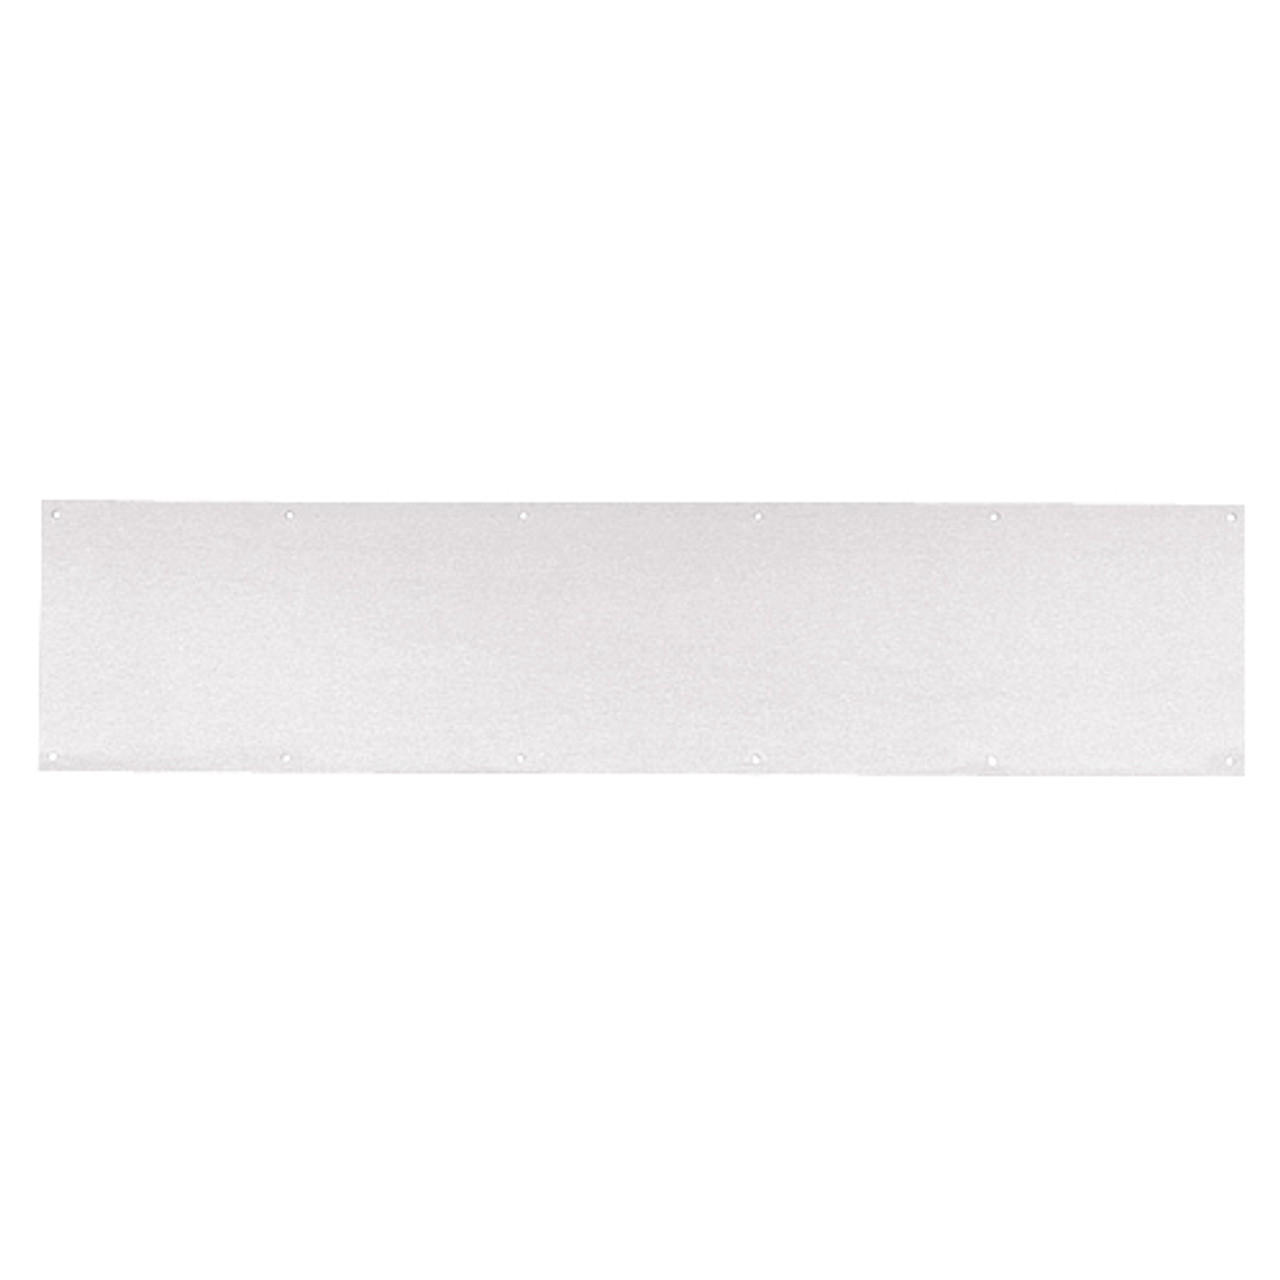 8400-US15-10x38-B-CS Ives 8400 Series Protection Plate in Satin Nickel